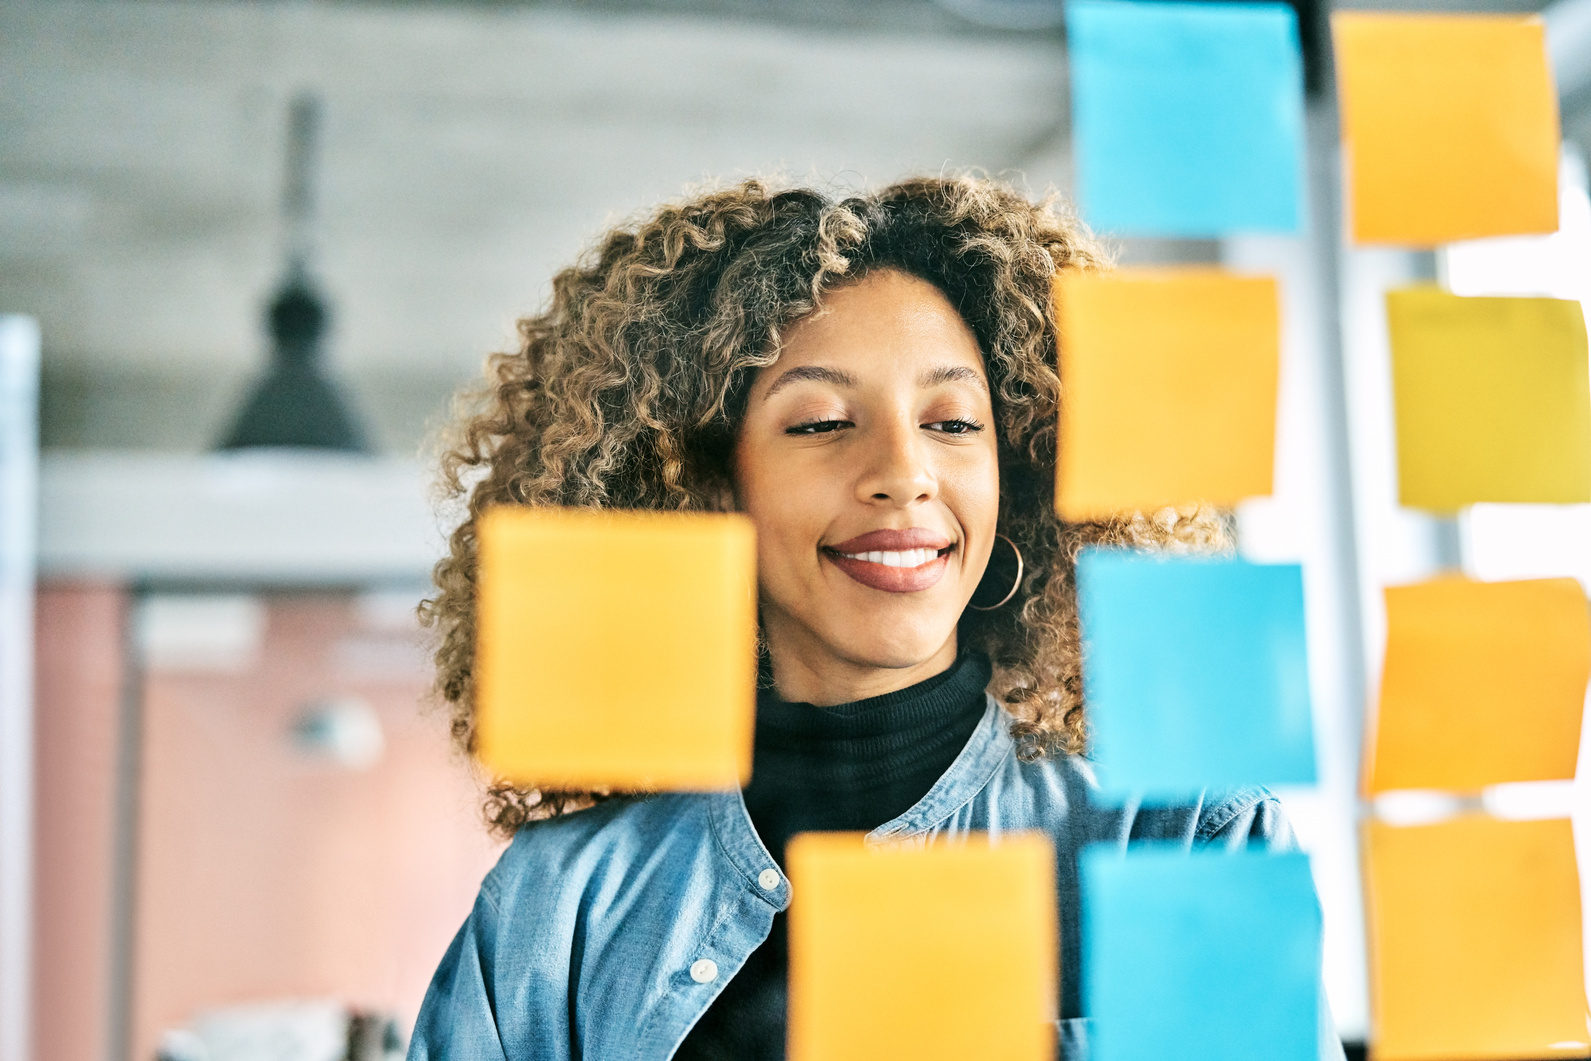 Woman Behind Rows of Sticky Notes 